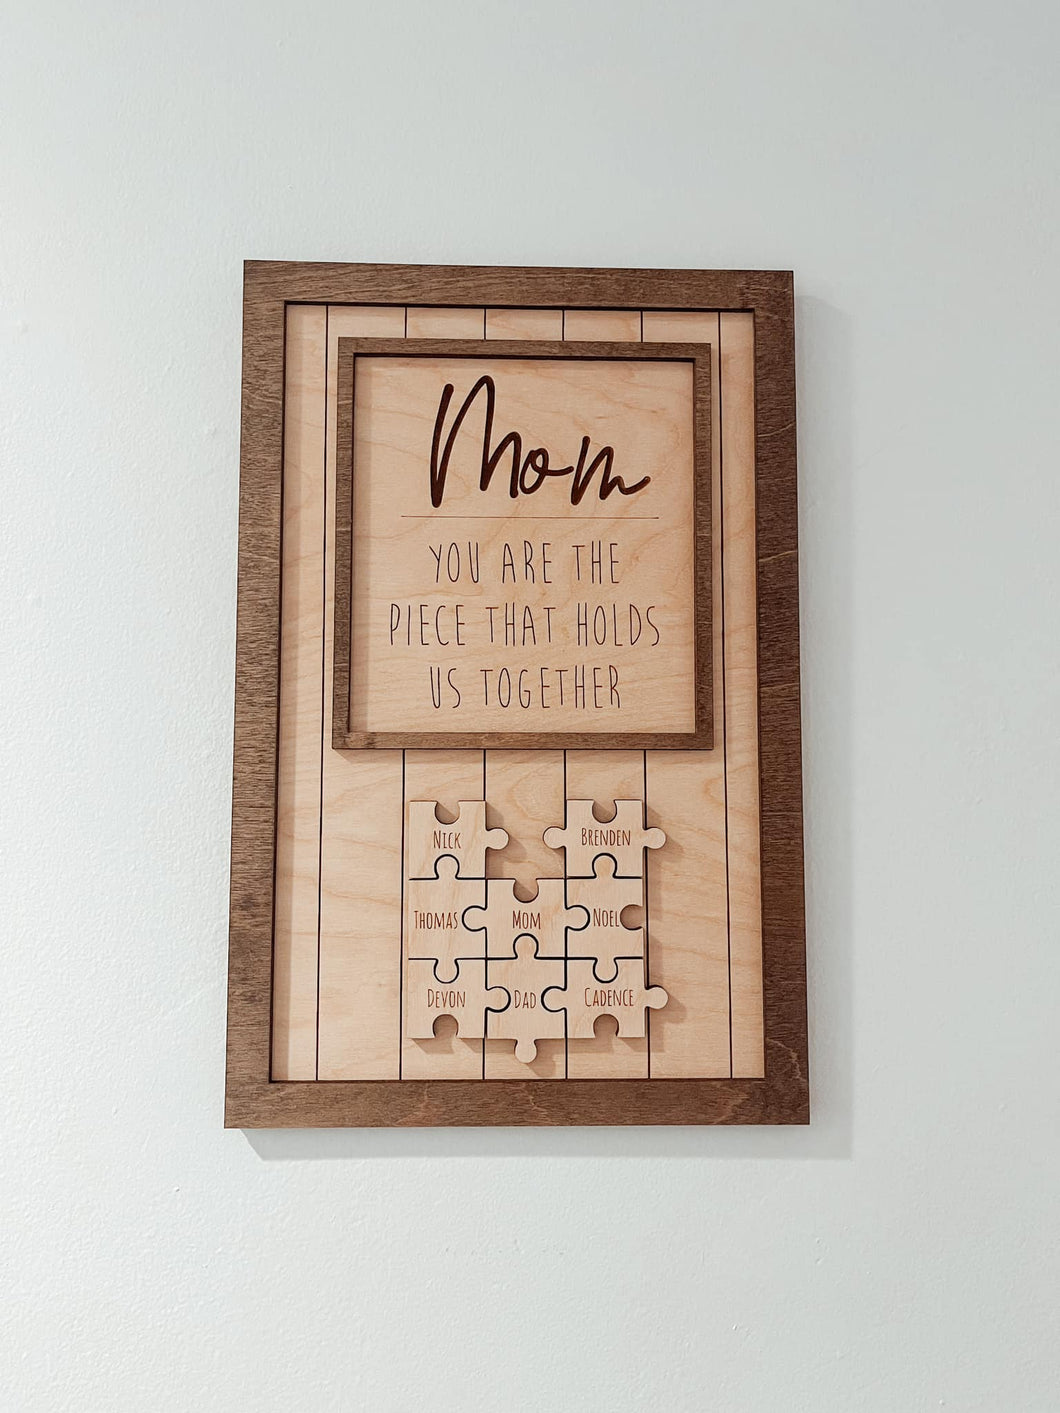 Mom-You are the piece that holds us together- puzzle piece